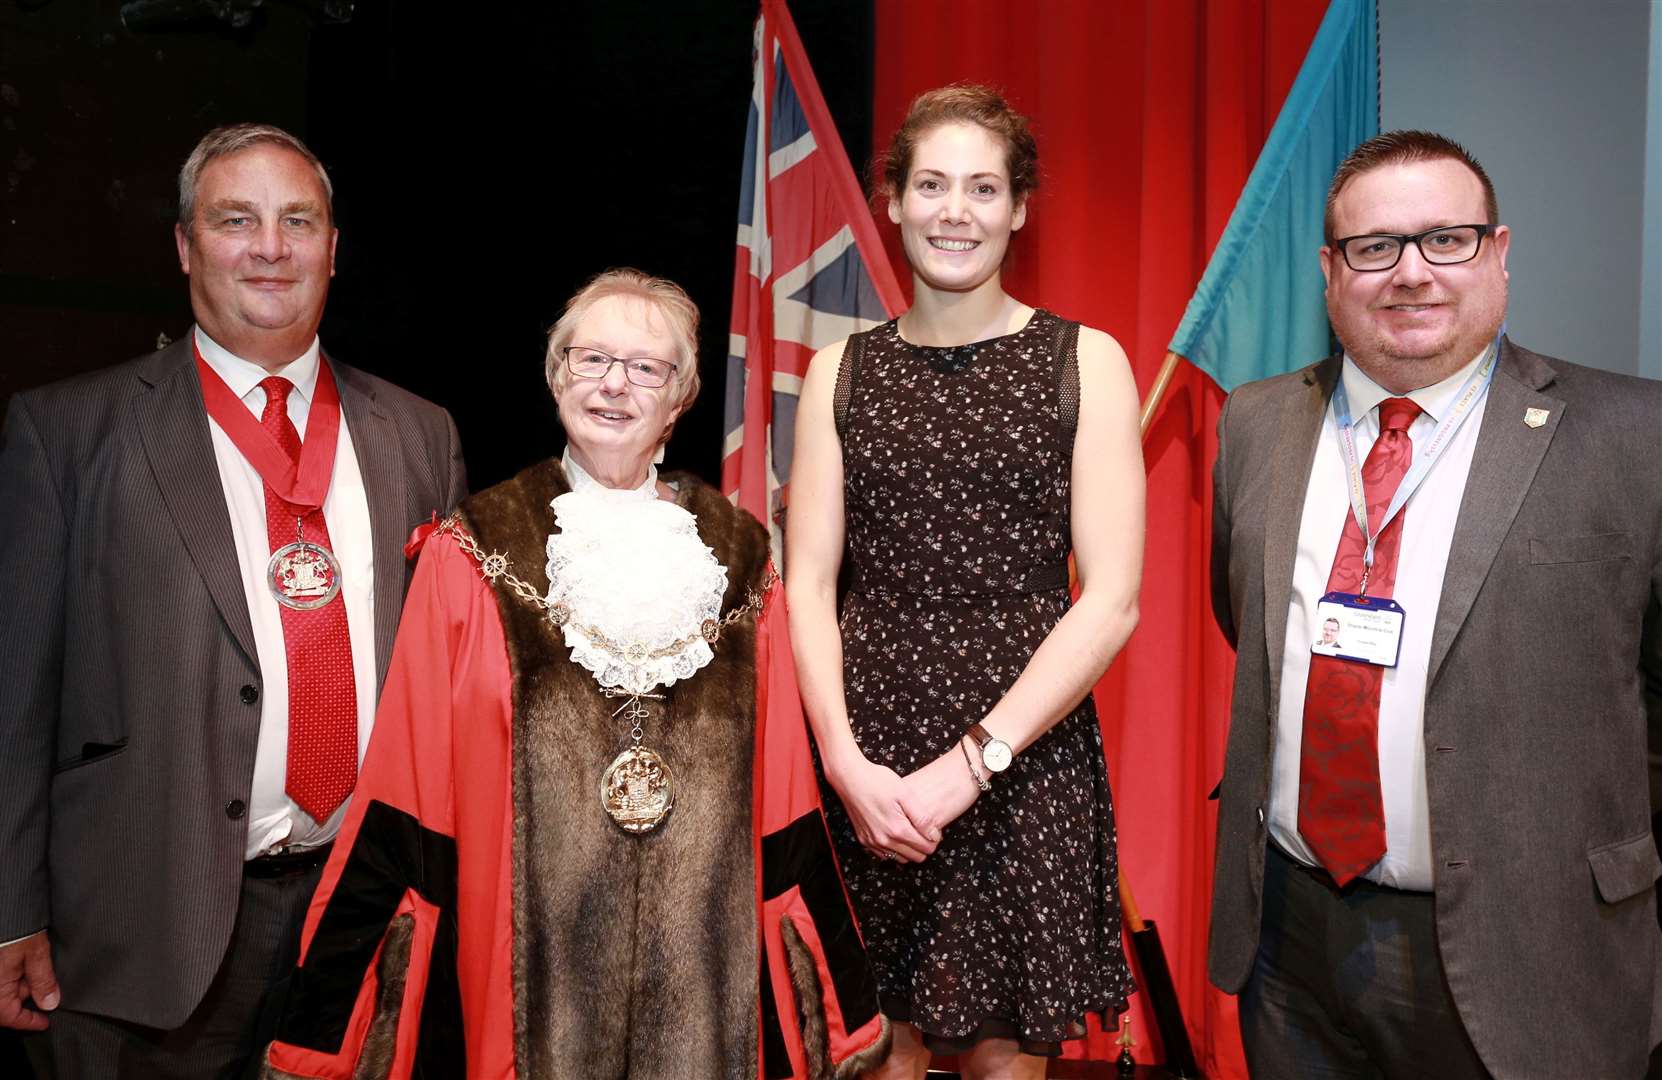 From left: Gravesham council leader John Burden, Mayor Cllr Lyn Milner, Olympian Kate French and Cllr Shane Mochrie-Cox at last year's Gravesham Civic Awards 2021. Pictures Phil Lee/Gravesham council